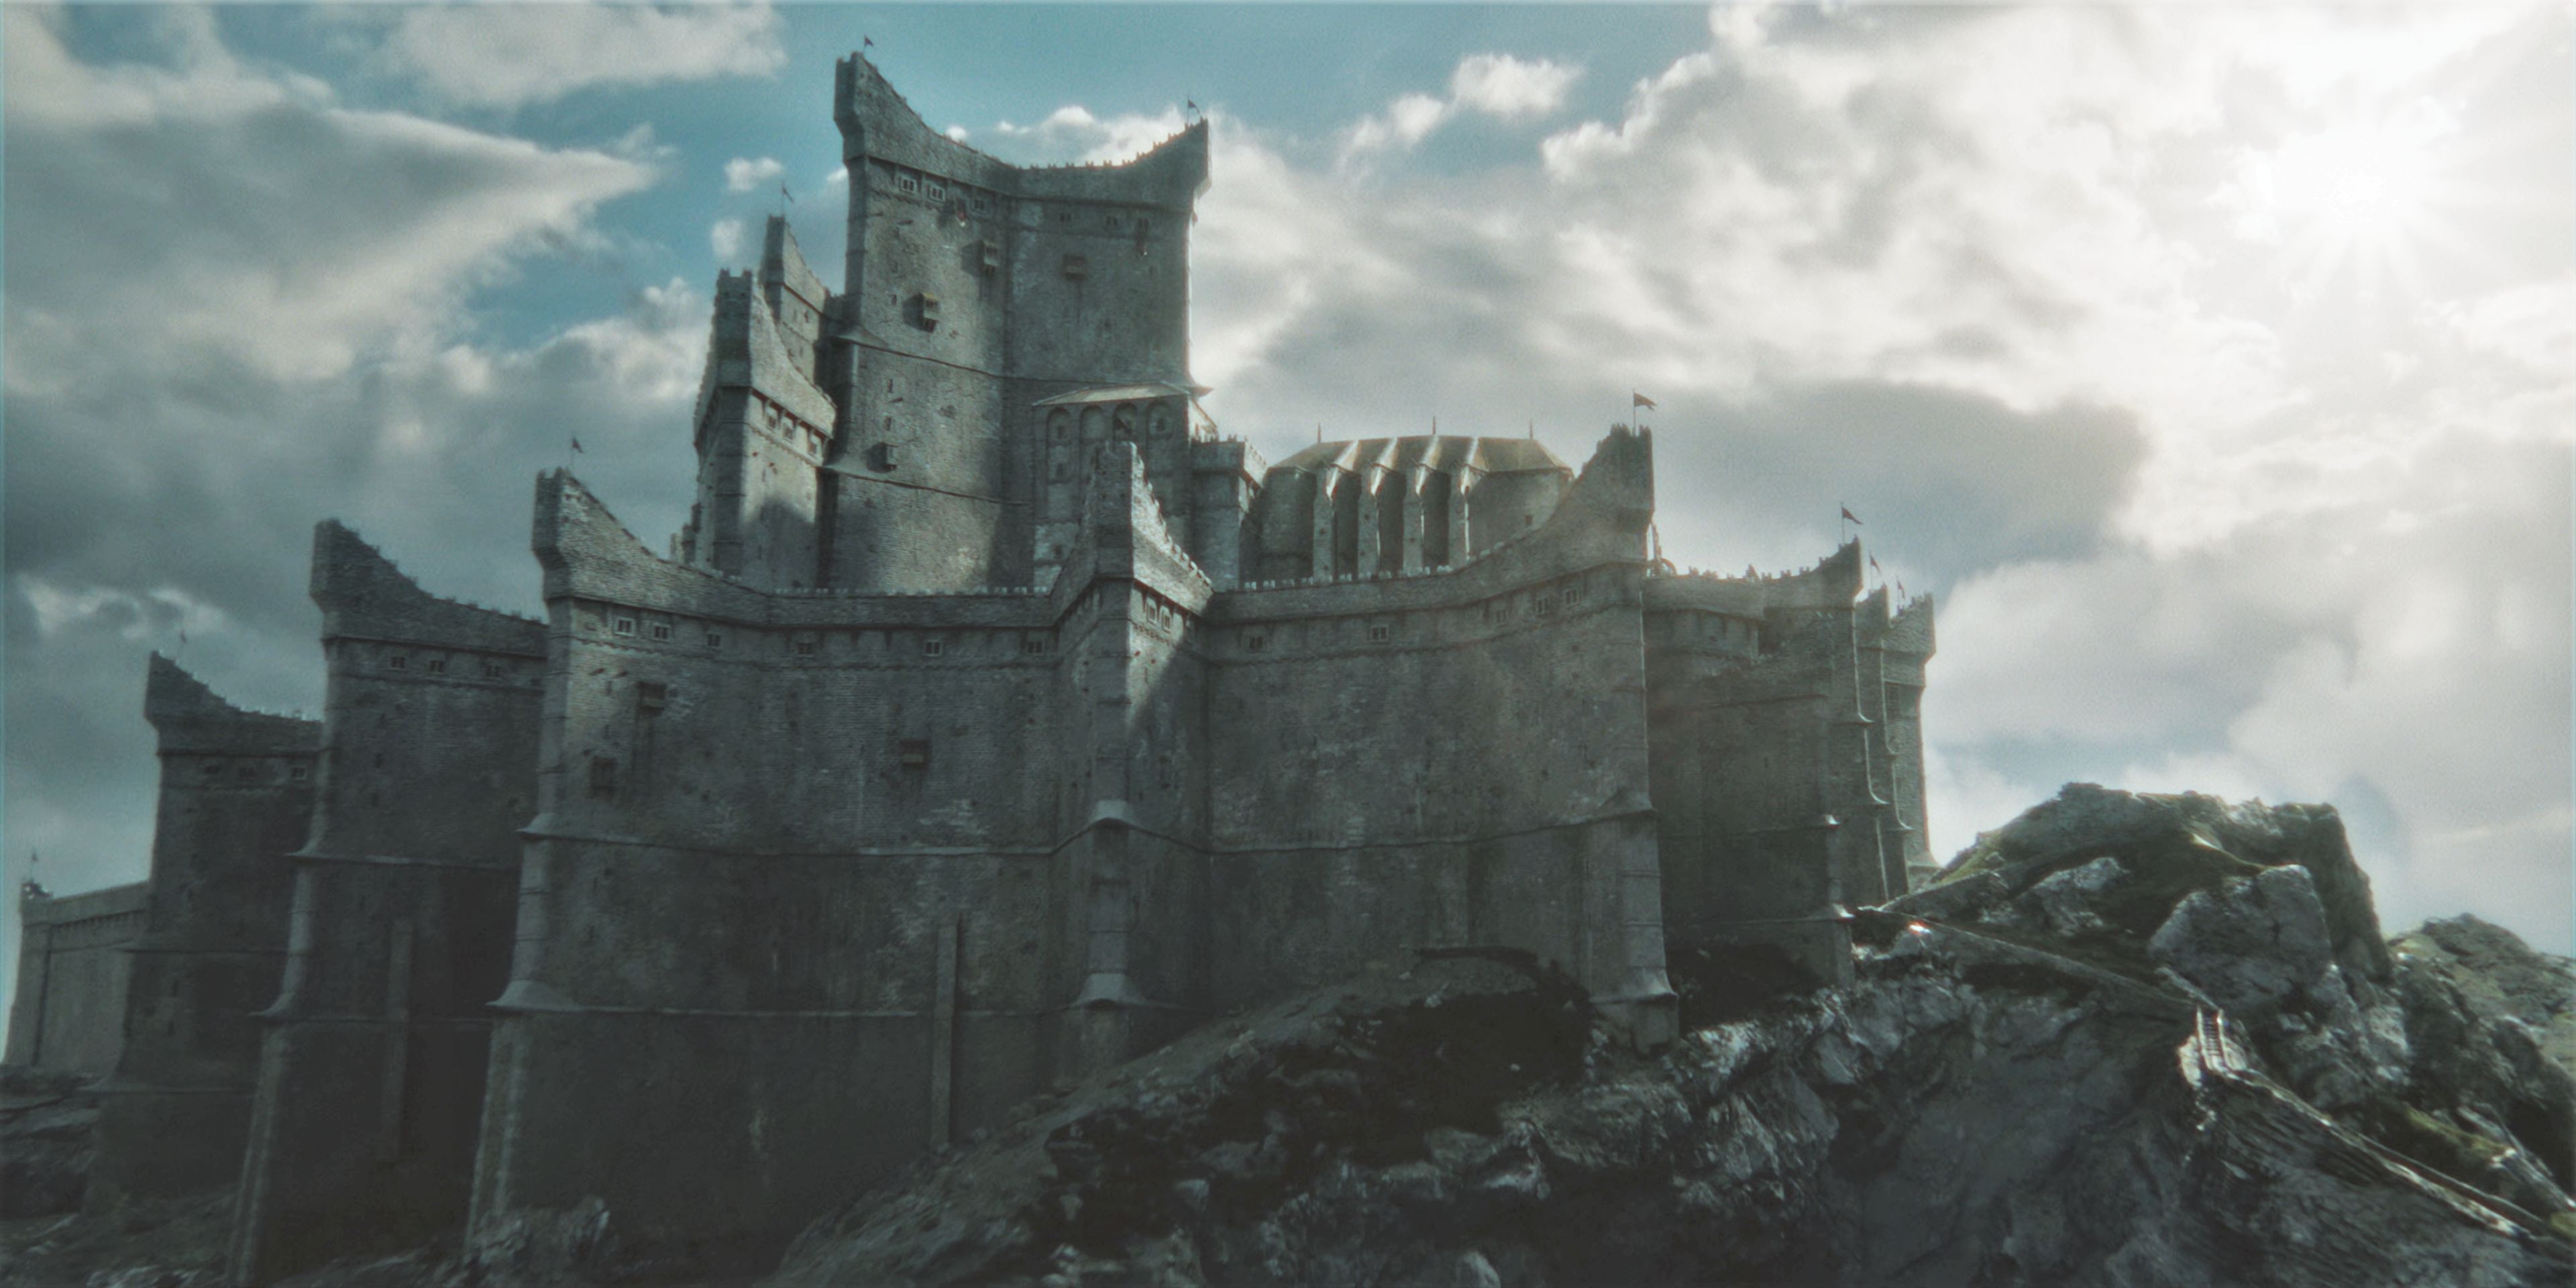 Dragonstone isn't exactly known for its Southern European architecture...